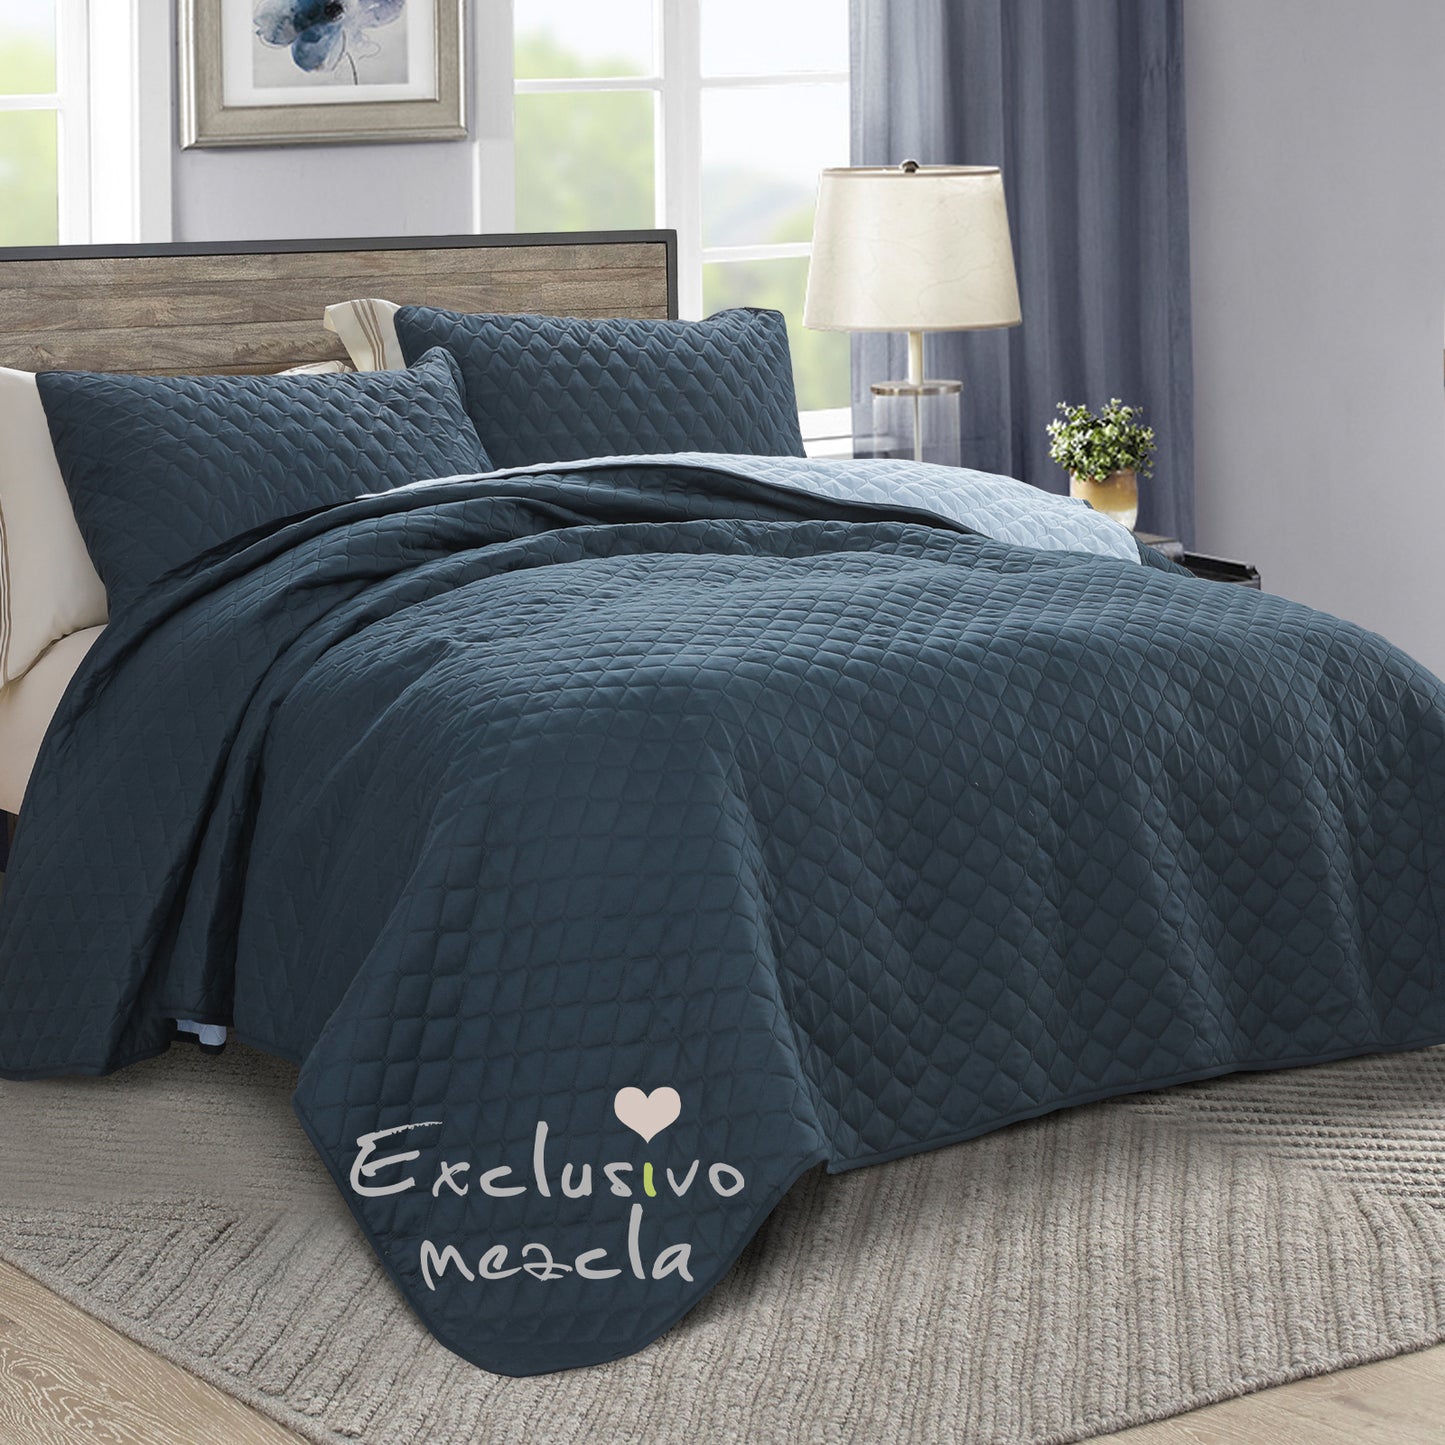 Exclusivo Mezcla Ultrasonic Reversible King Size Quilt Bedding Set with Pillow Shams, Lightweight Quilts King Size, Soft Bedspreads Bed Coverlets for All Seasons - (Navy Blue, 104"x96")